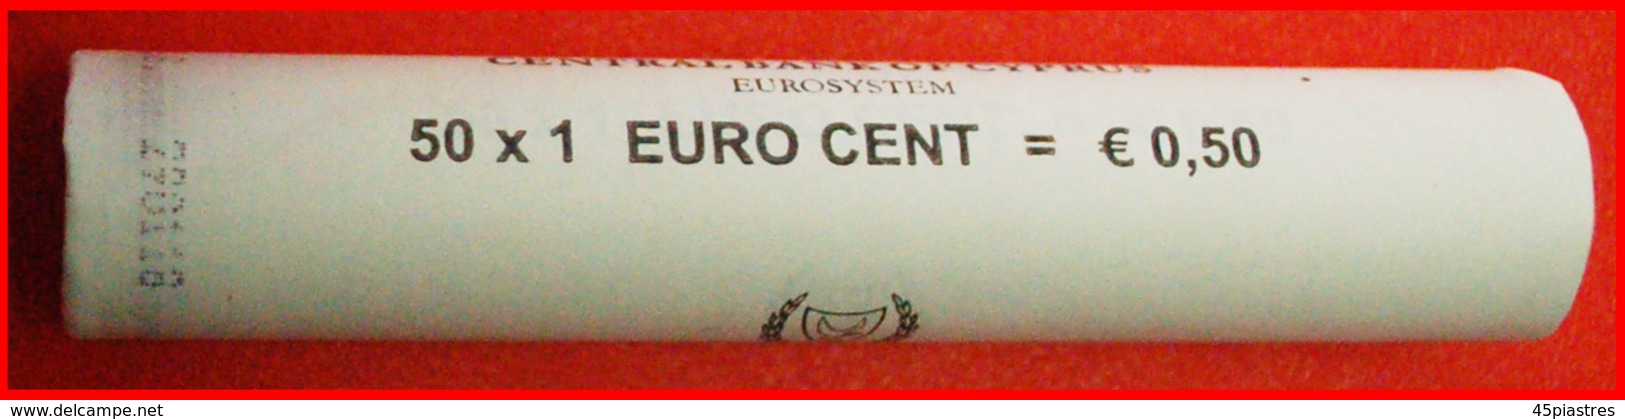 # GREECE: CYPRUS ★ 1 CENT 2018 UNC ROLL! LOW START ★ NO RESERVE! - Rotolini